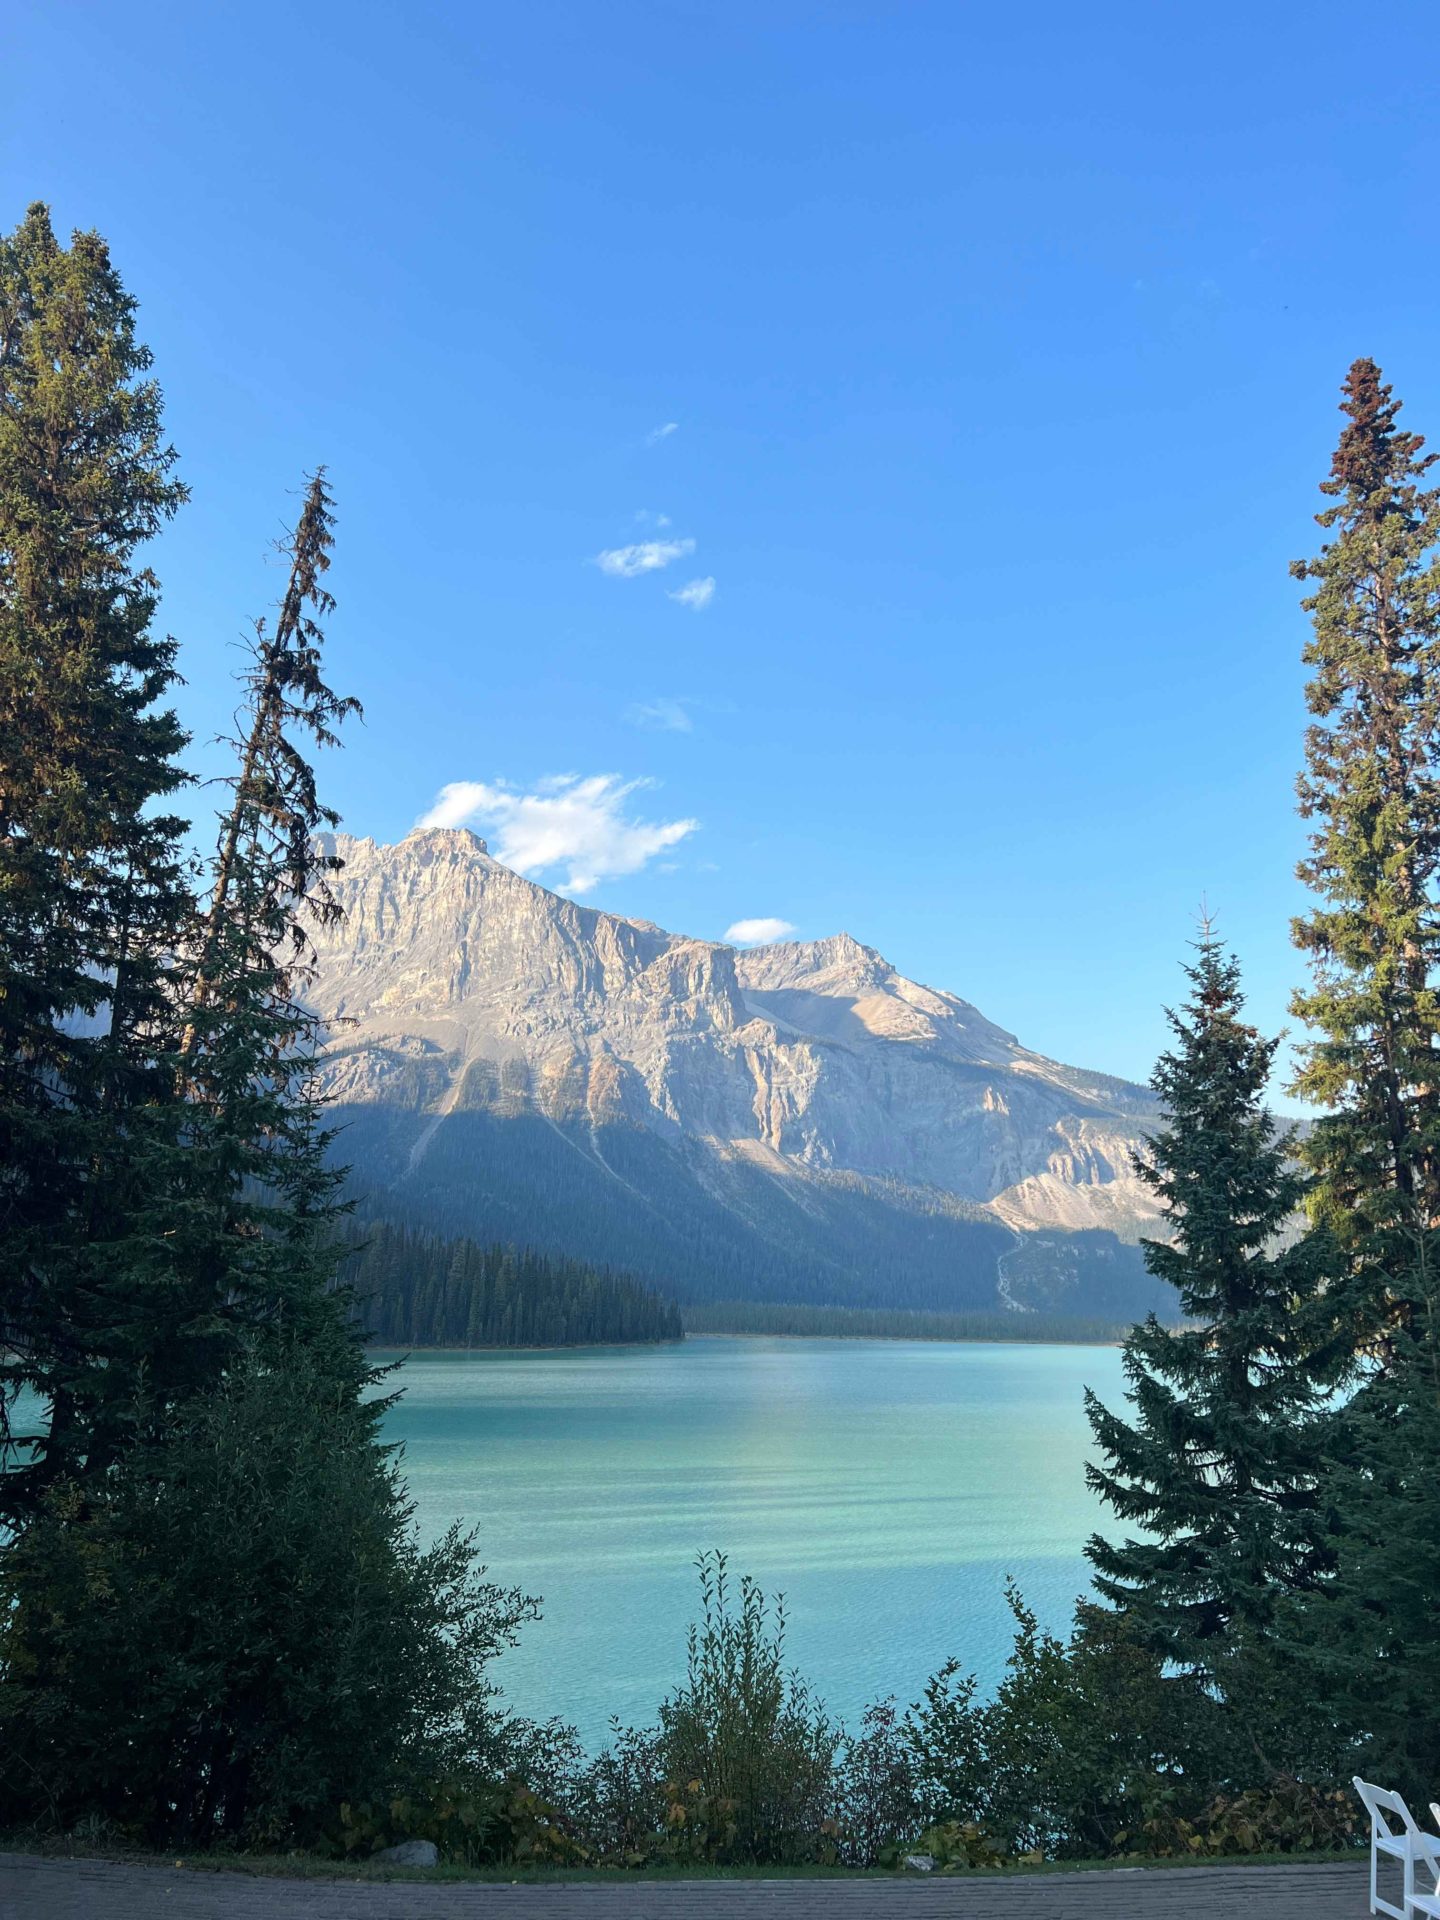 A view of the mountains in Yoho National Park in the Rockies - Canada Road Trip Itinerary